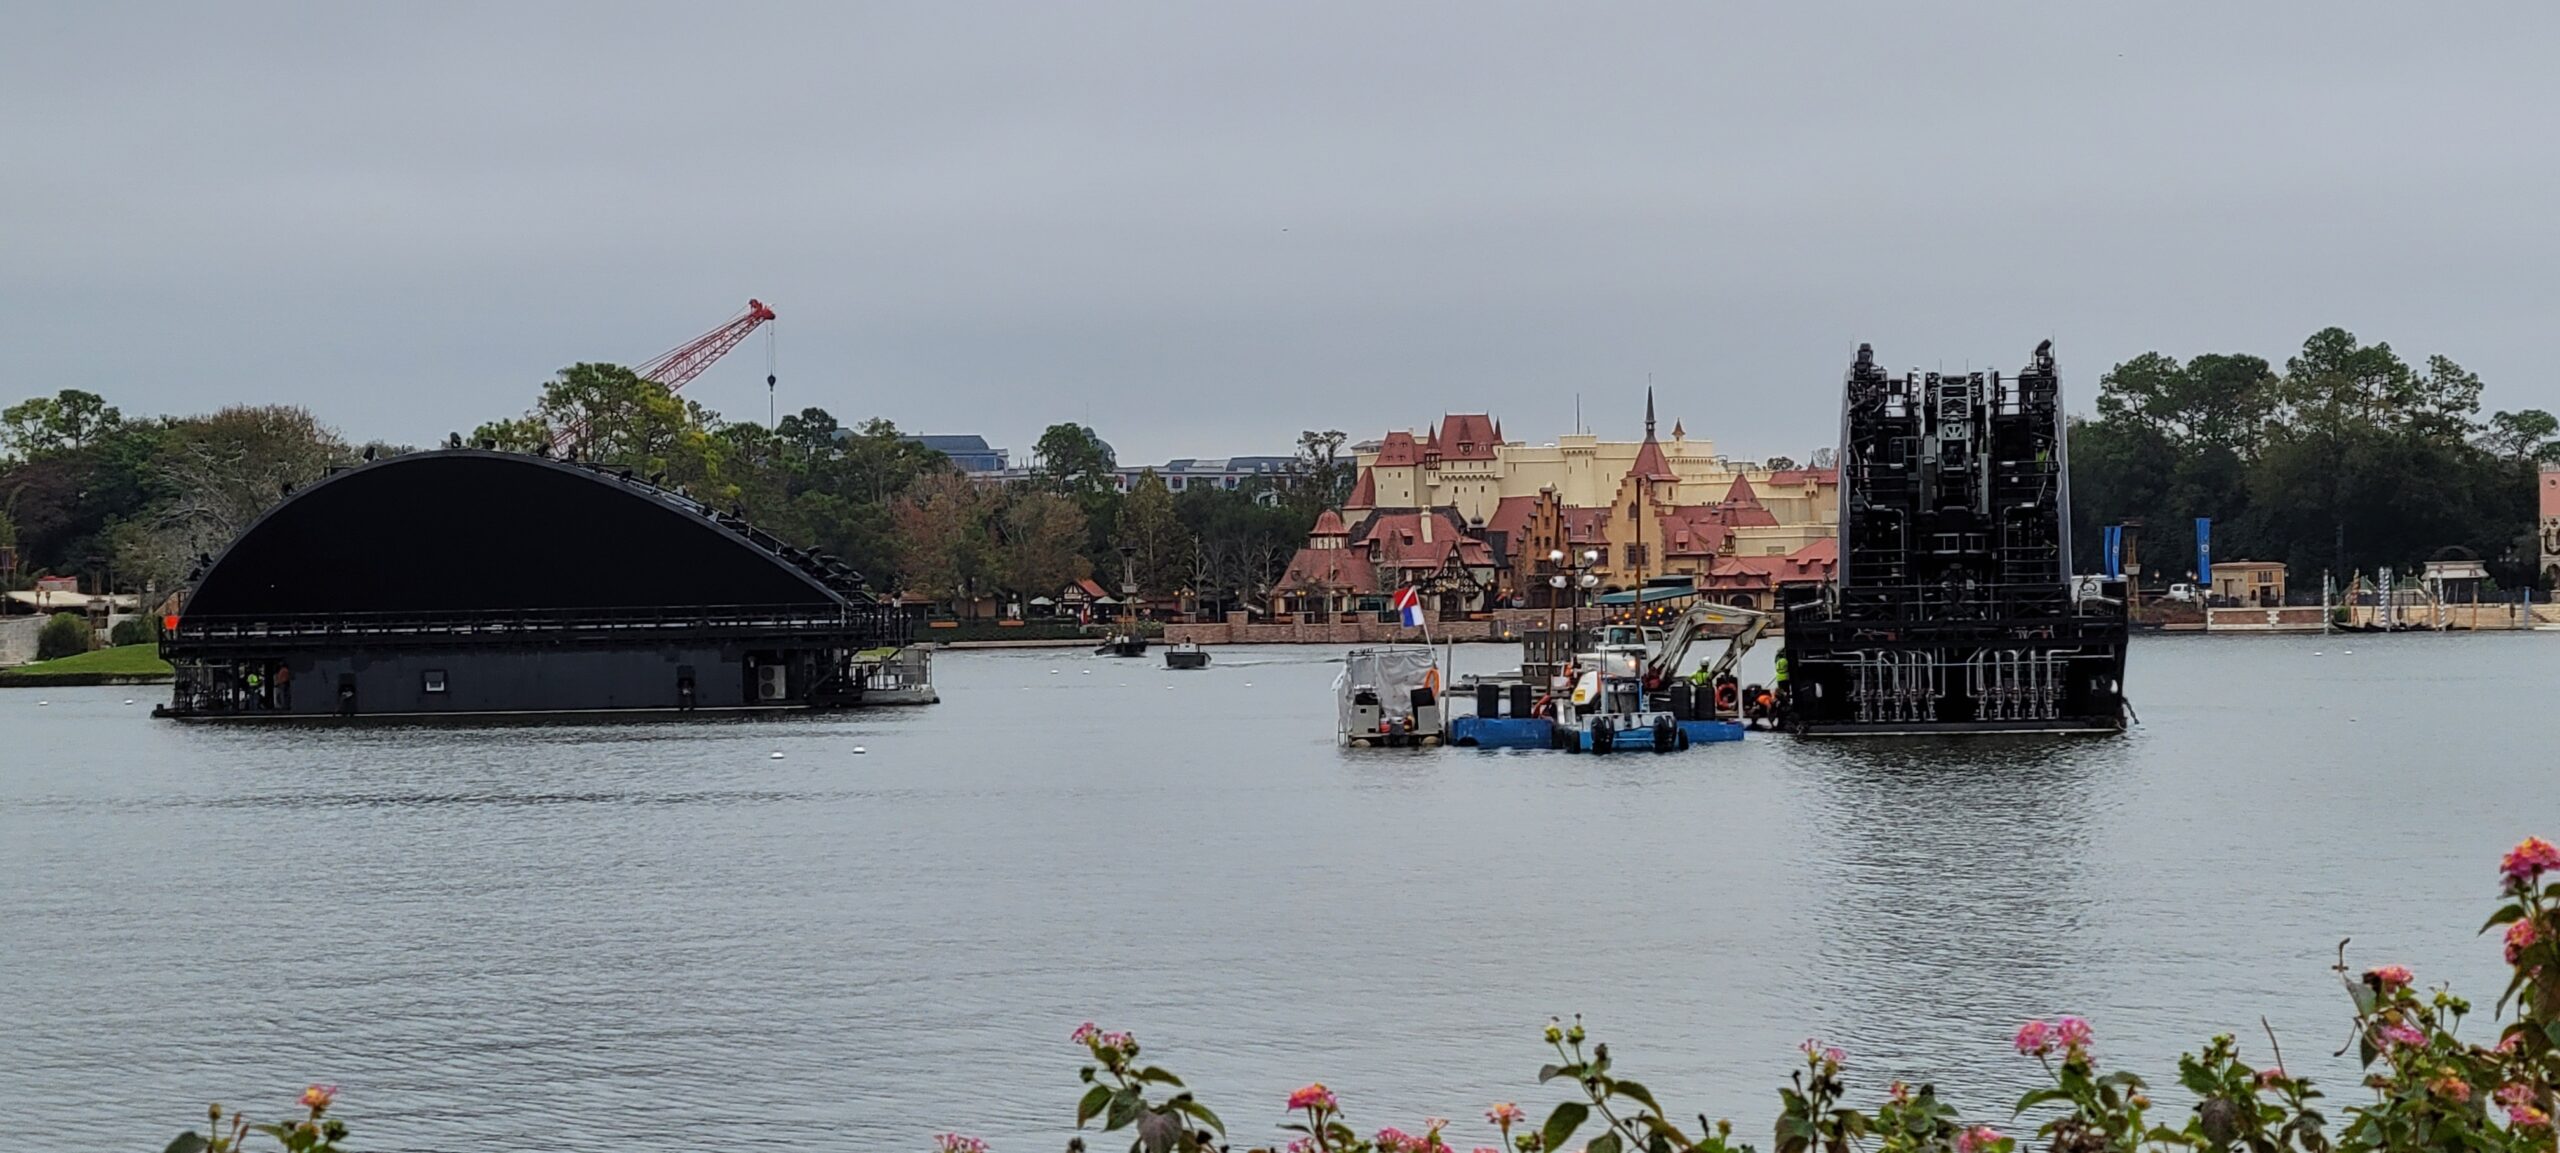 Second Barge Added to Showcase Lagoon at Epcot for Harmonious